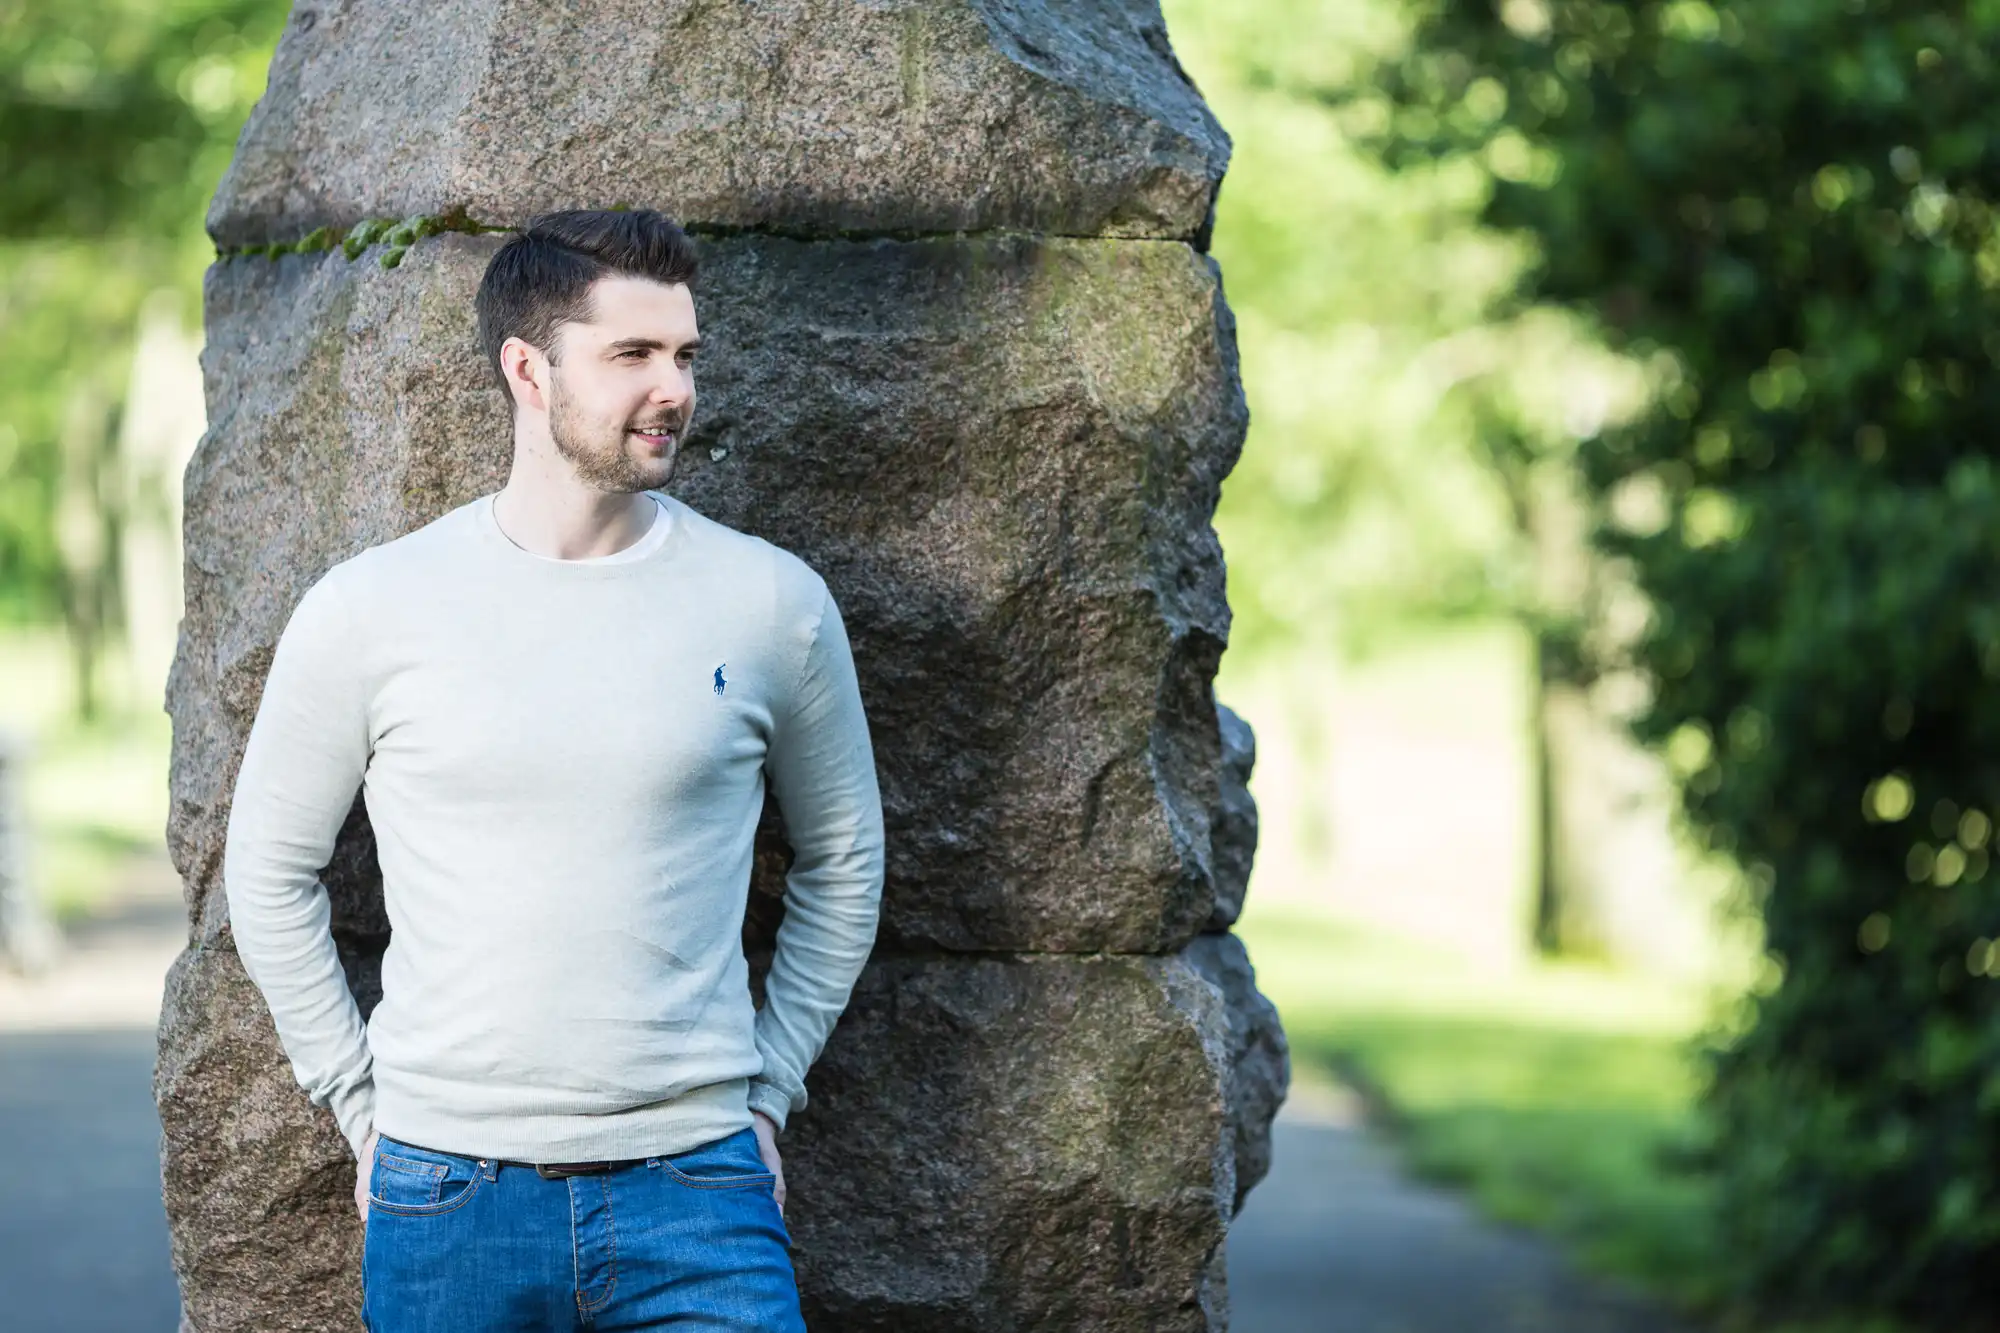 A man in a casual long-sleeve shirt leaning against a large rock in a sunny park, looking to his left with a slight smile.